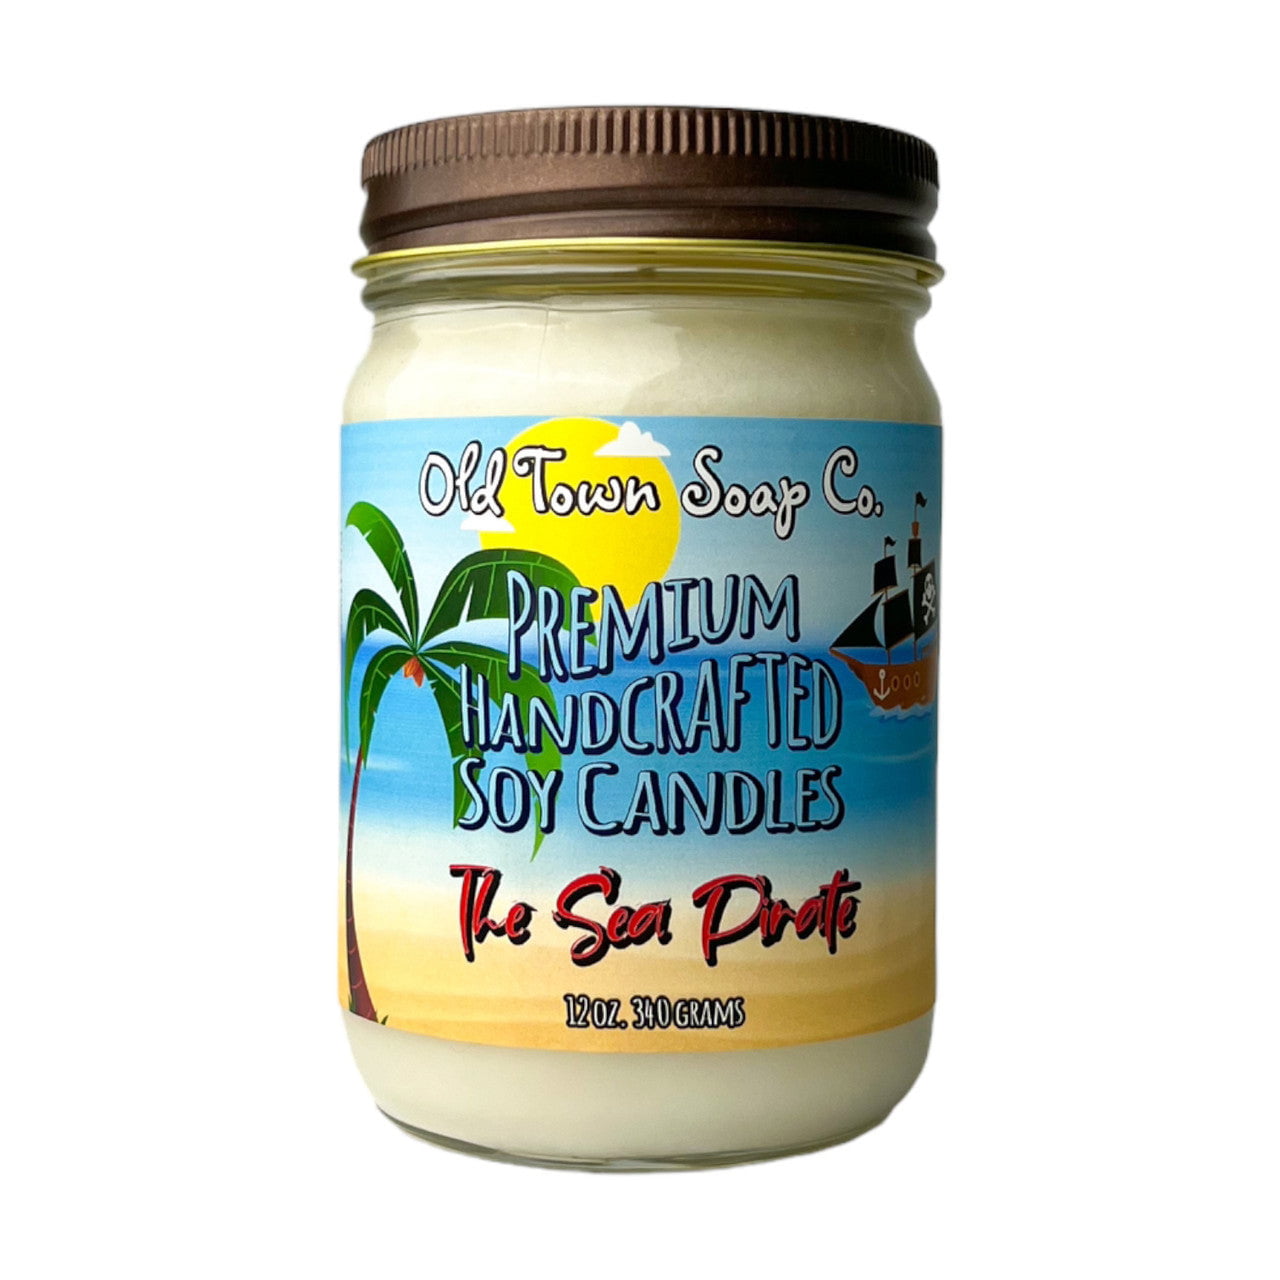 The Sea Pirate - 12oz. Candles - Old Town Soap Co.